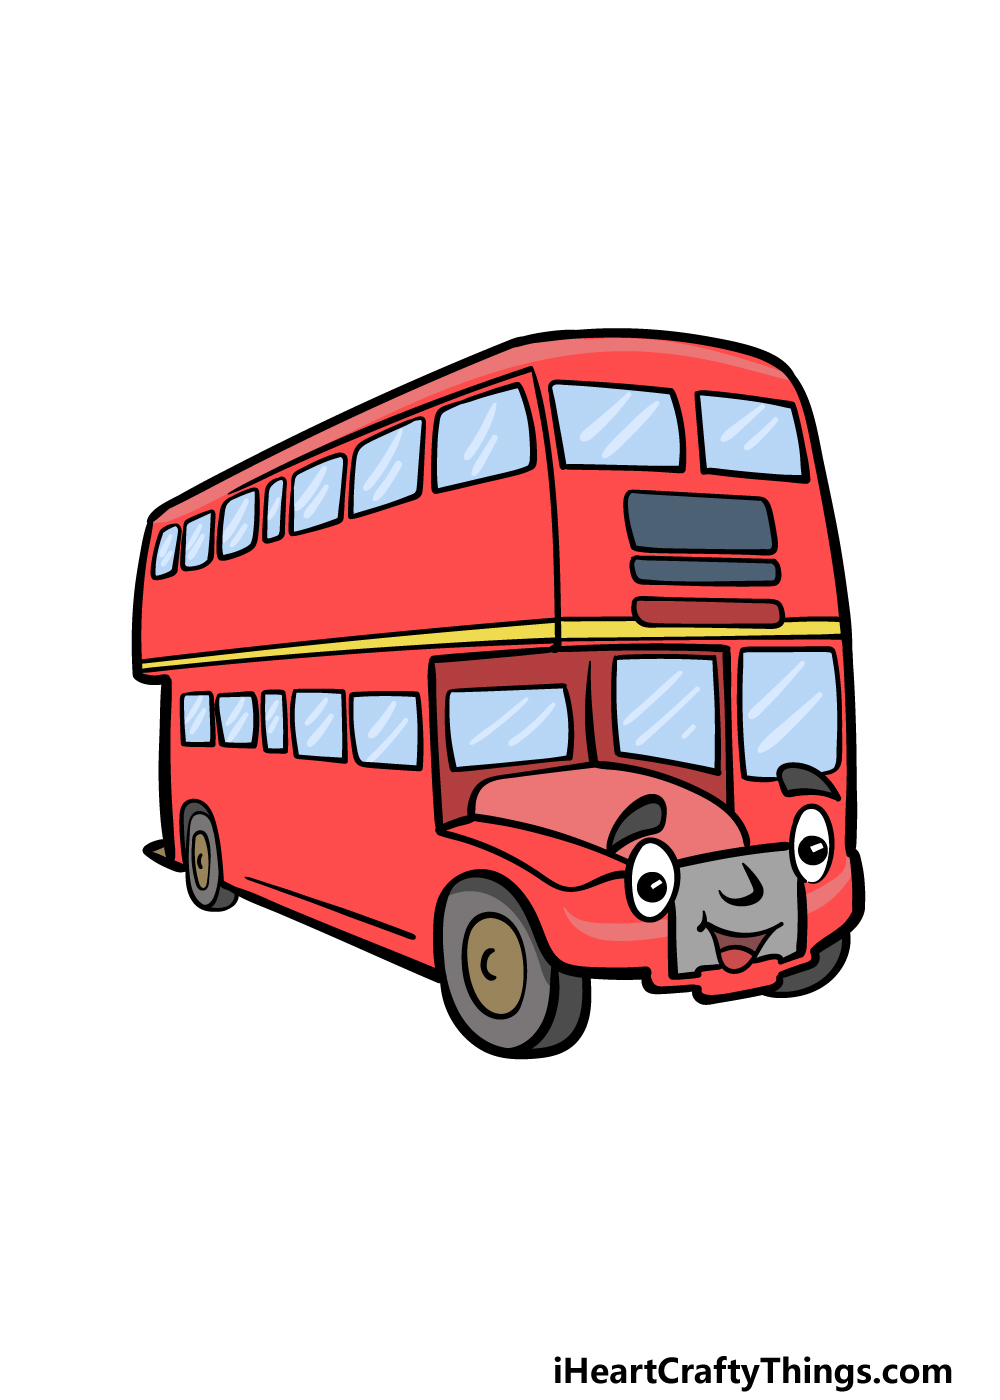 Easy School Bus Step-by-Step Drawing Tutorial - Easy Drawing Guides